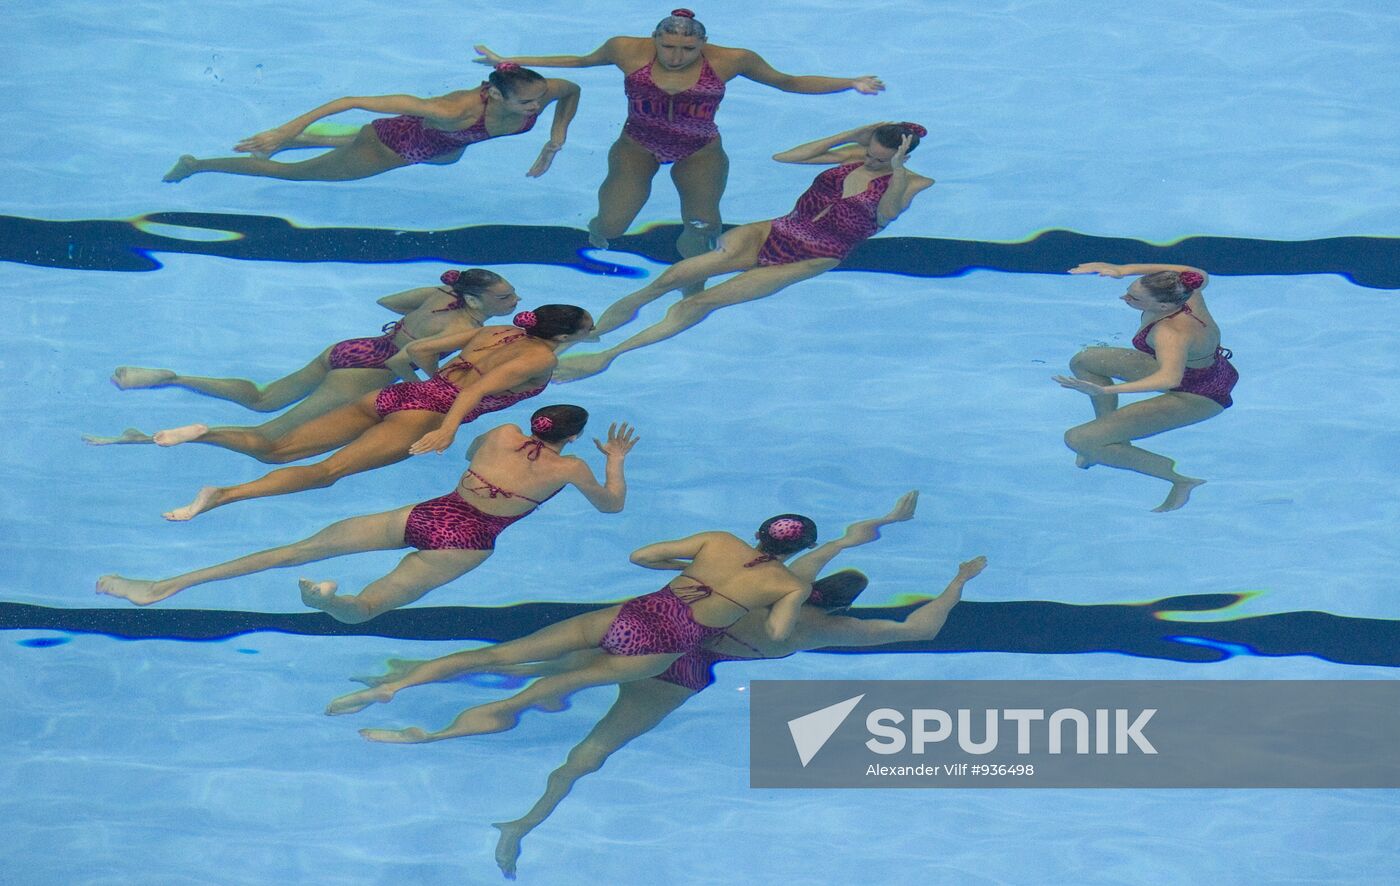 Spanish sync swimmers perform in combined event